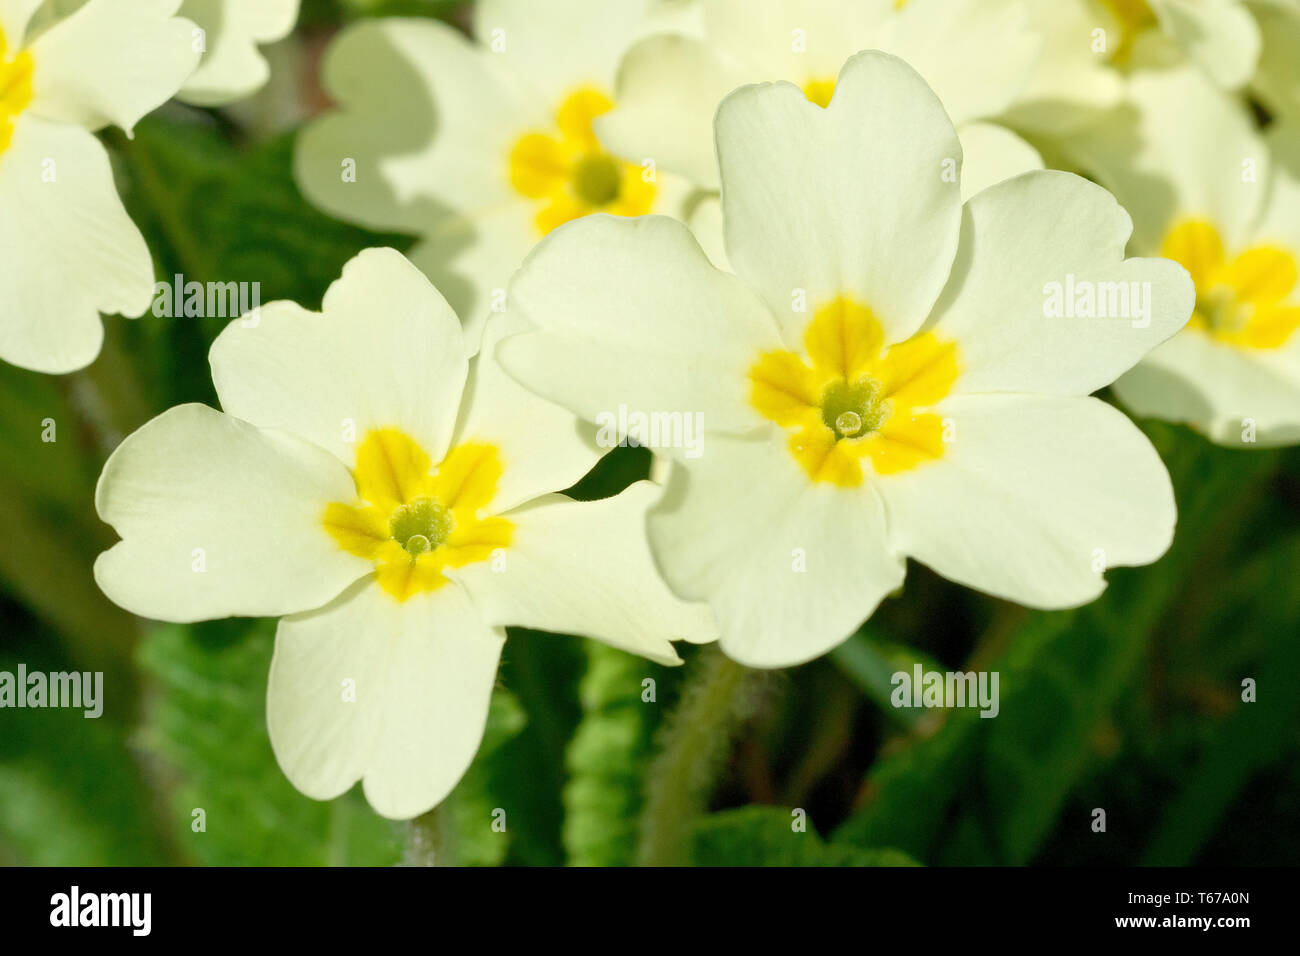 Primroses (primula vulgaris), close up of two pin-eye forms of the flower. Stock Photo